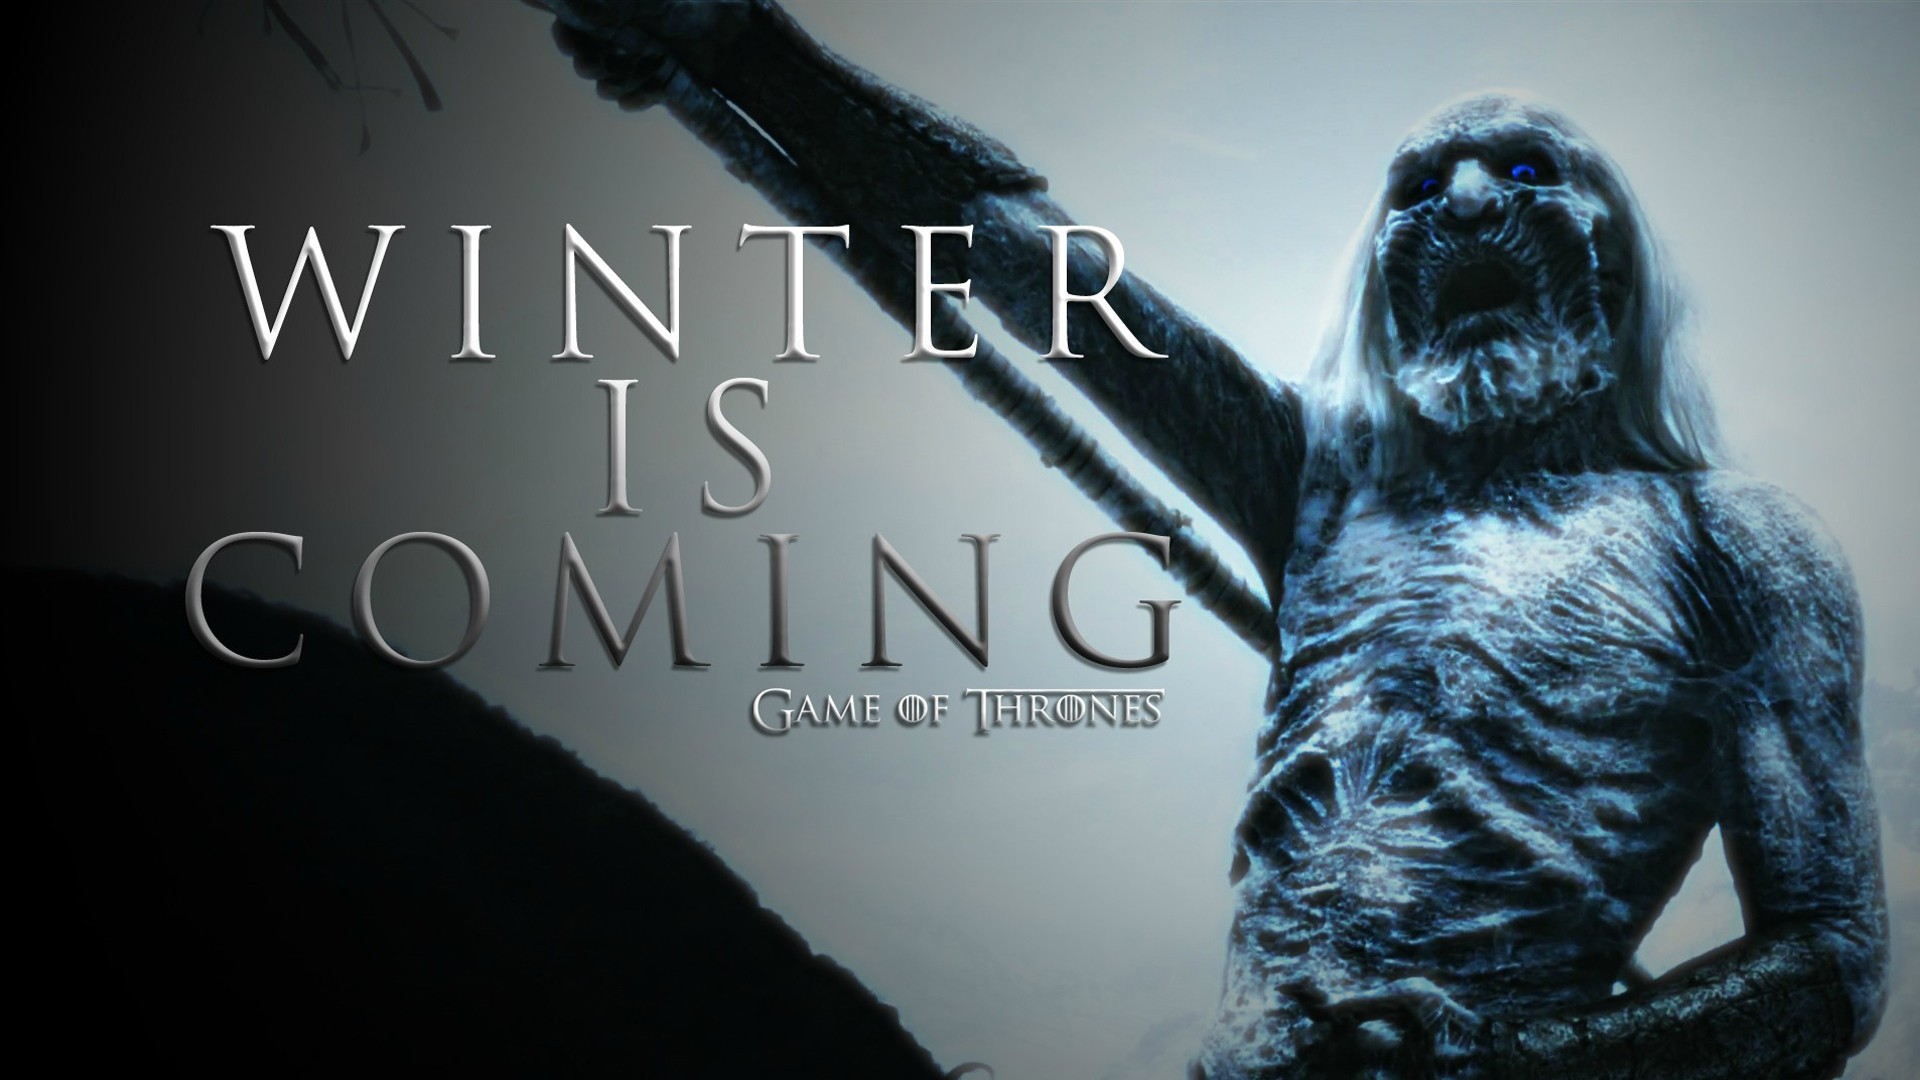 Game of Thrones - A Telltale Games Series Wallpapers